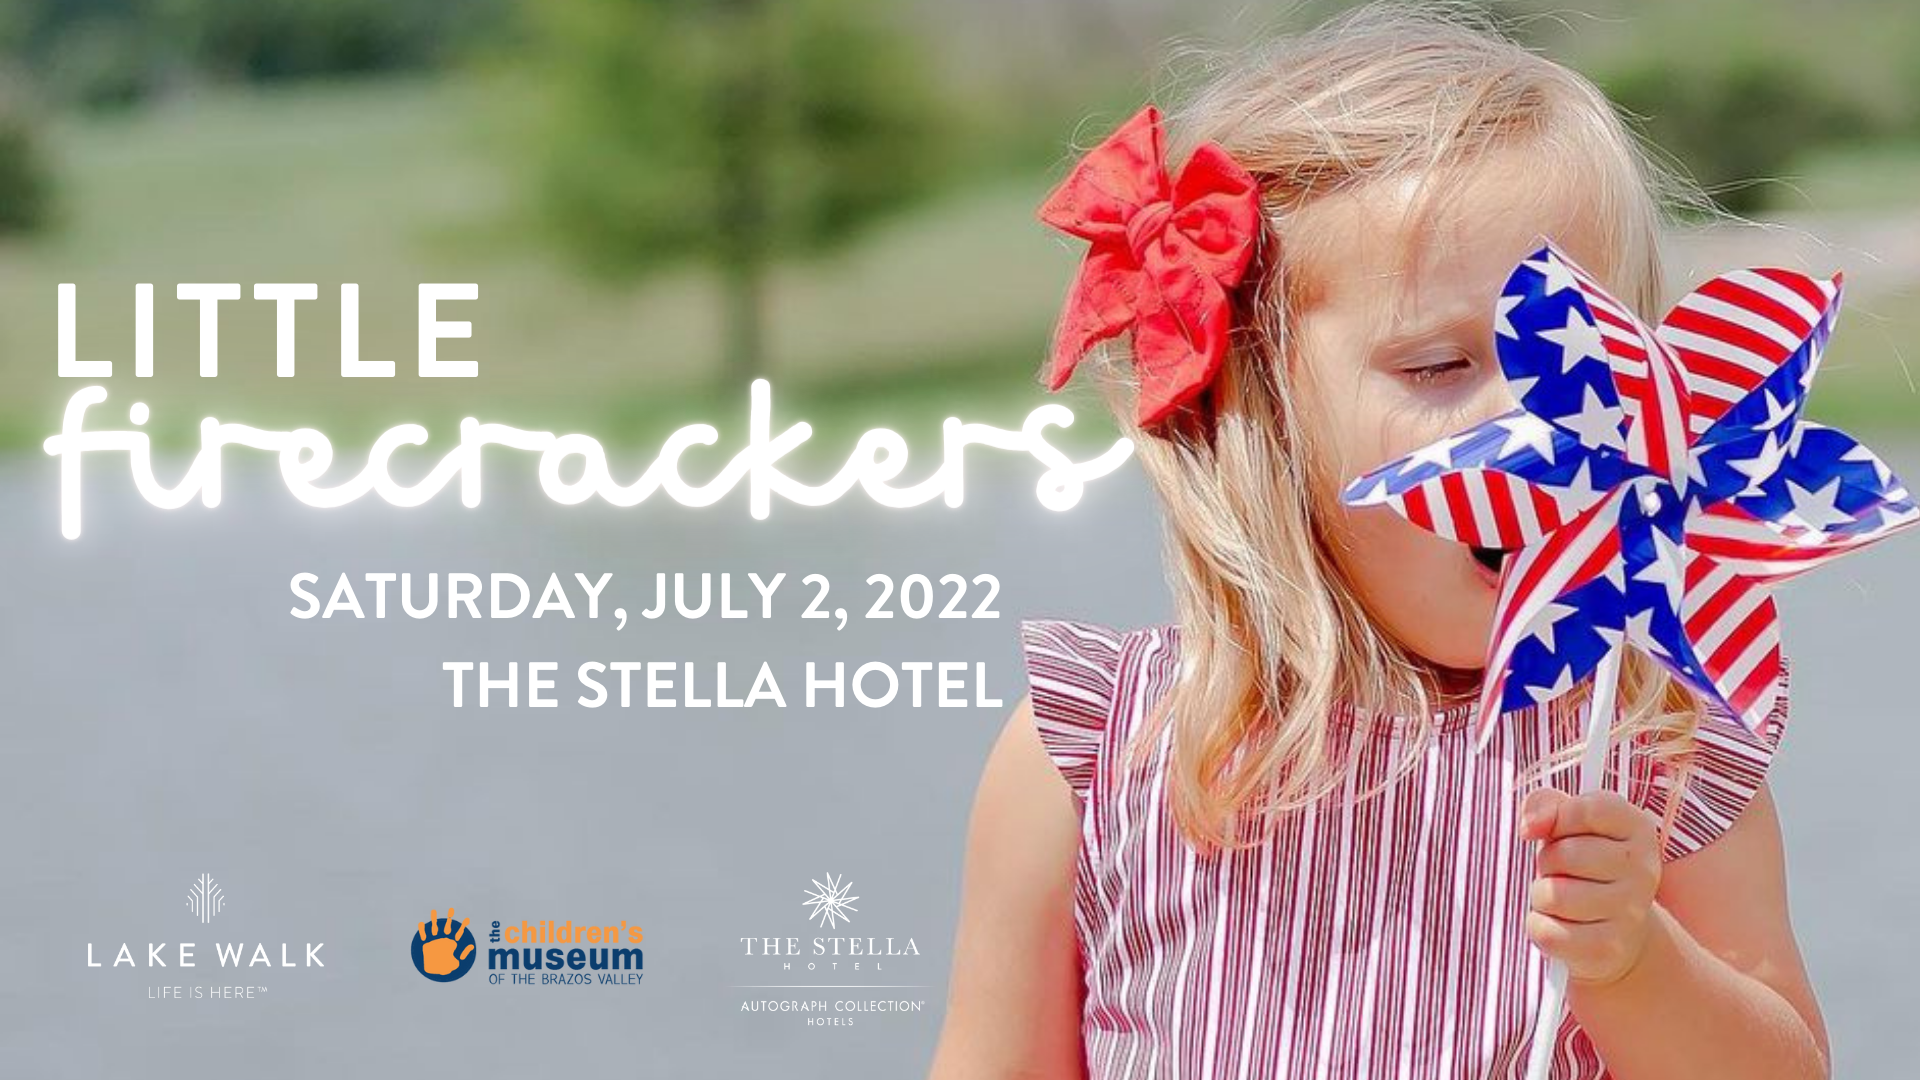 event cover photo featuring a little girl blowing a patriotic windmill